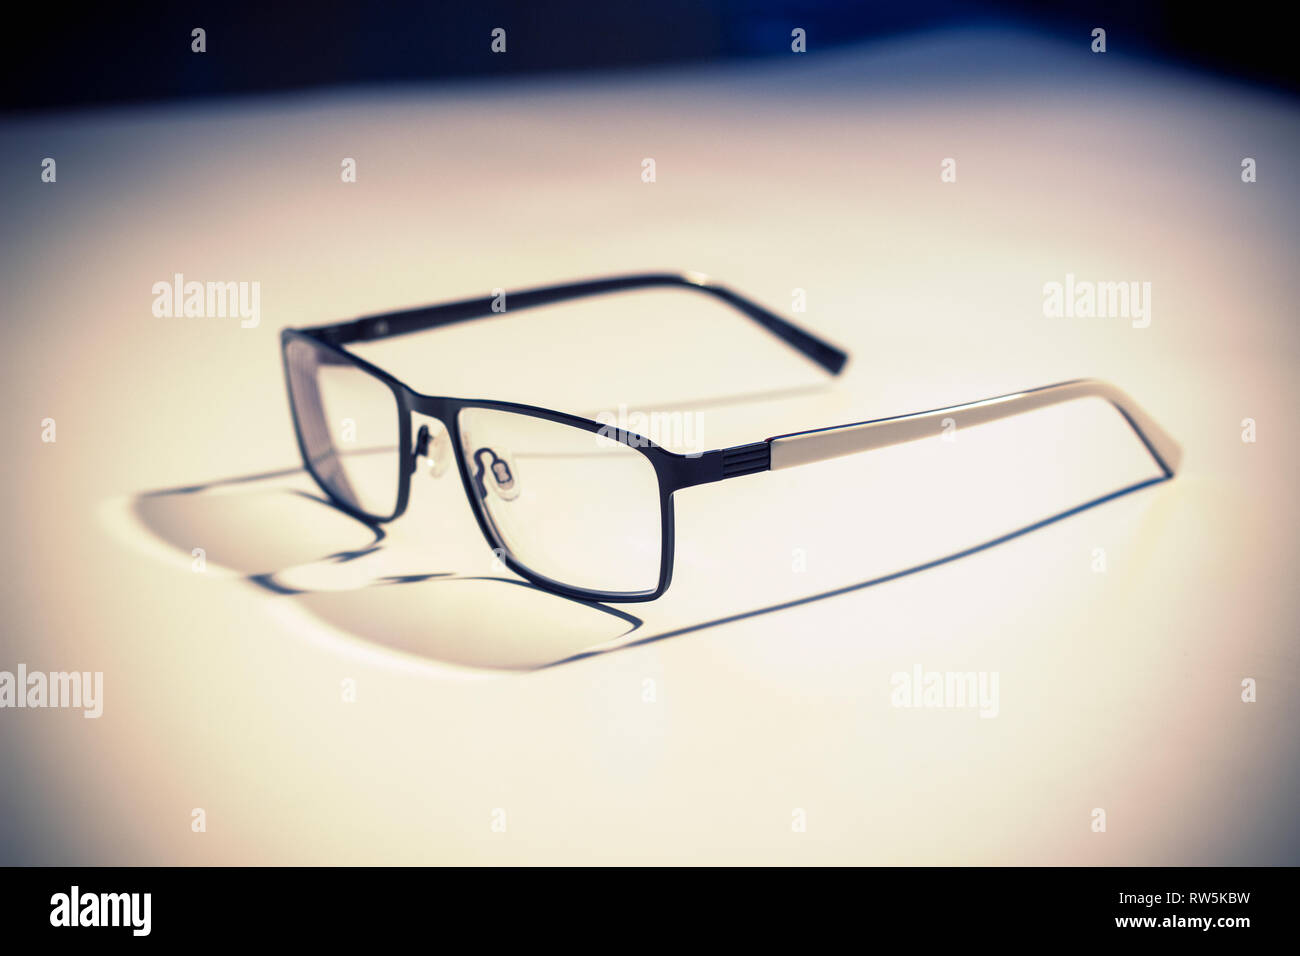 Square framed glasses with white arms Stock Photo